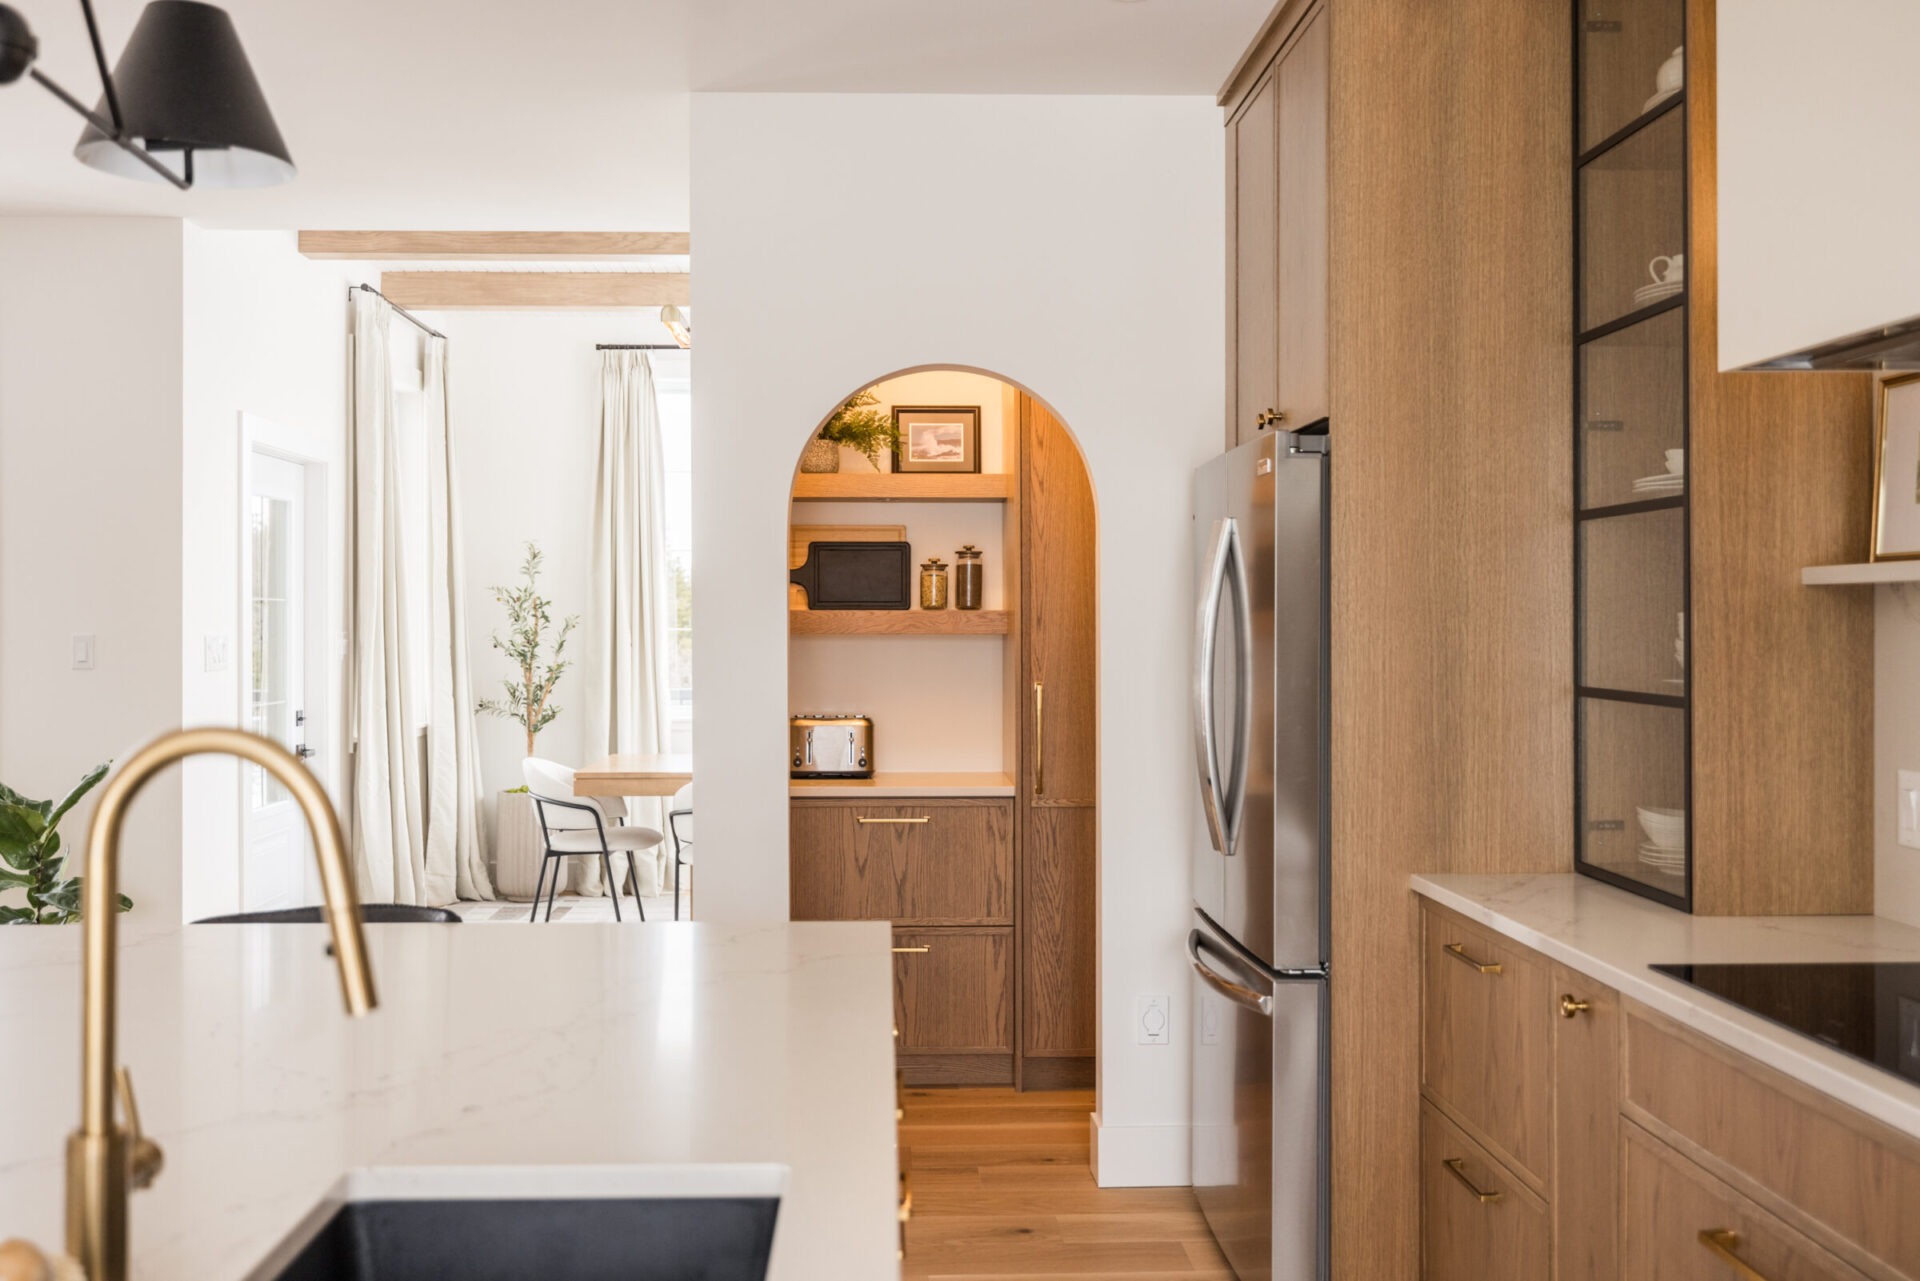 The image displays a modern kitchen with wooden cabinetry, a marble countertop, a gold faucet, stainless steel appliances, and an arched doorway.